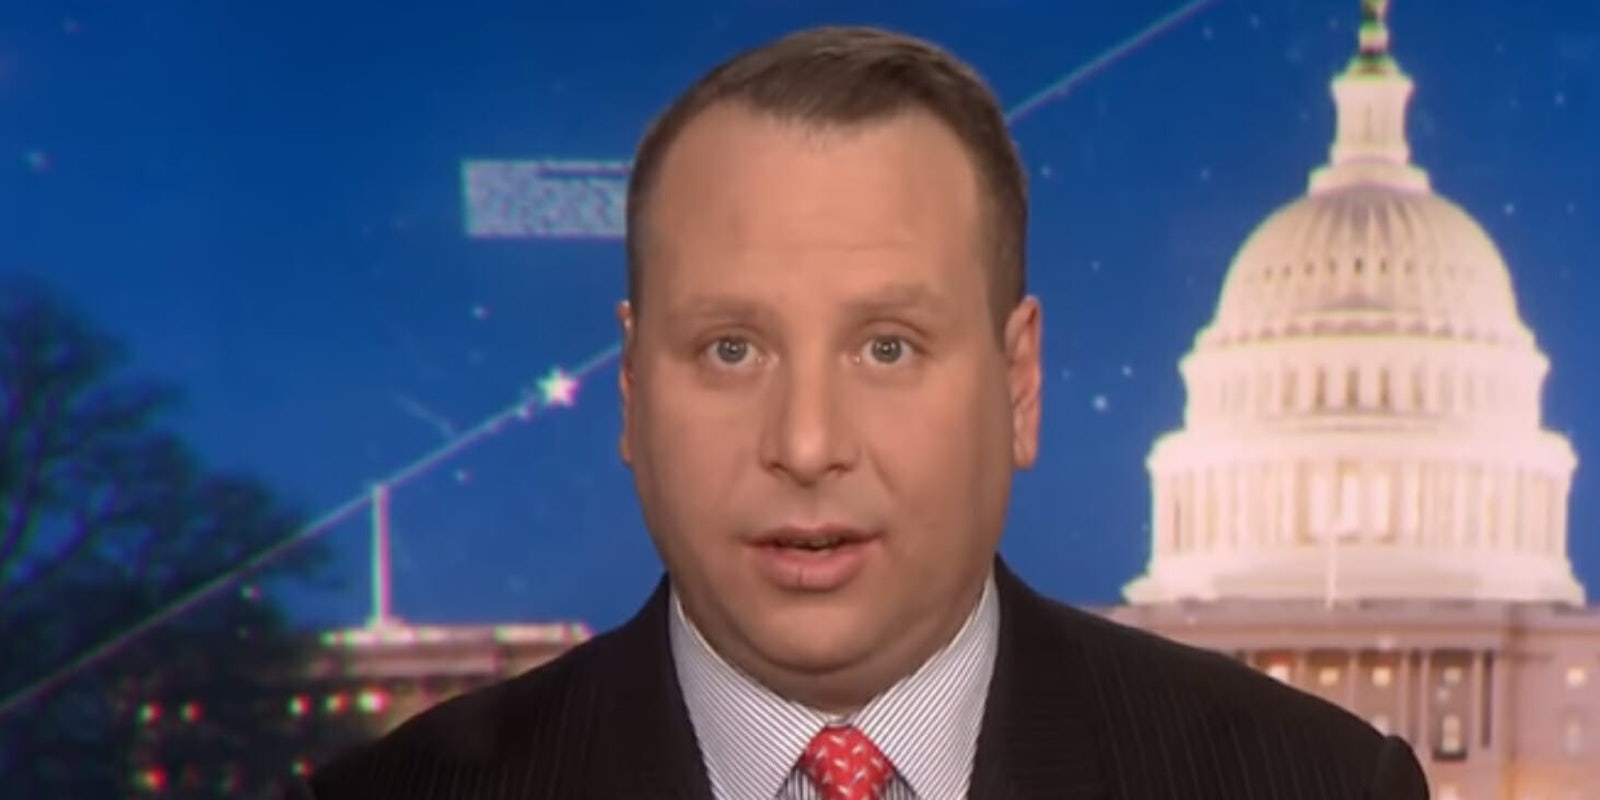 Former Trump campaign aide Sam Nunberg said he is refusing to comply with a subpoena given to him by Special Counsel Robert Mueller's office.